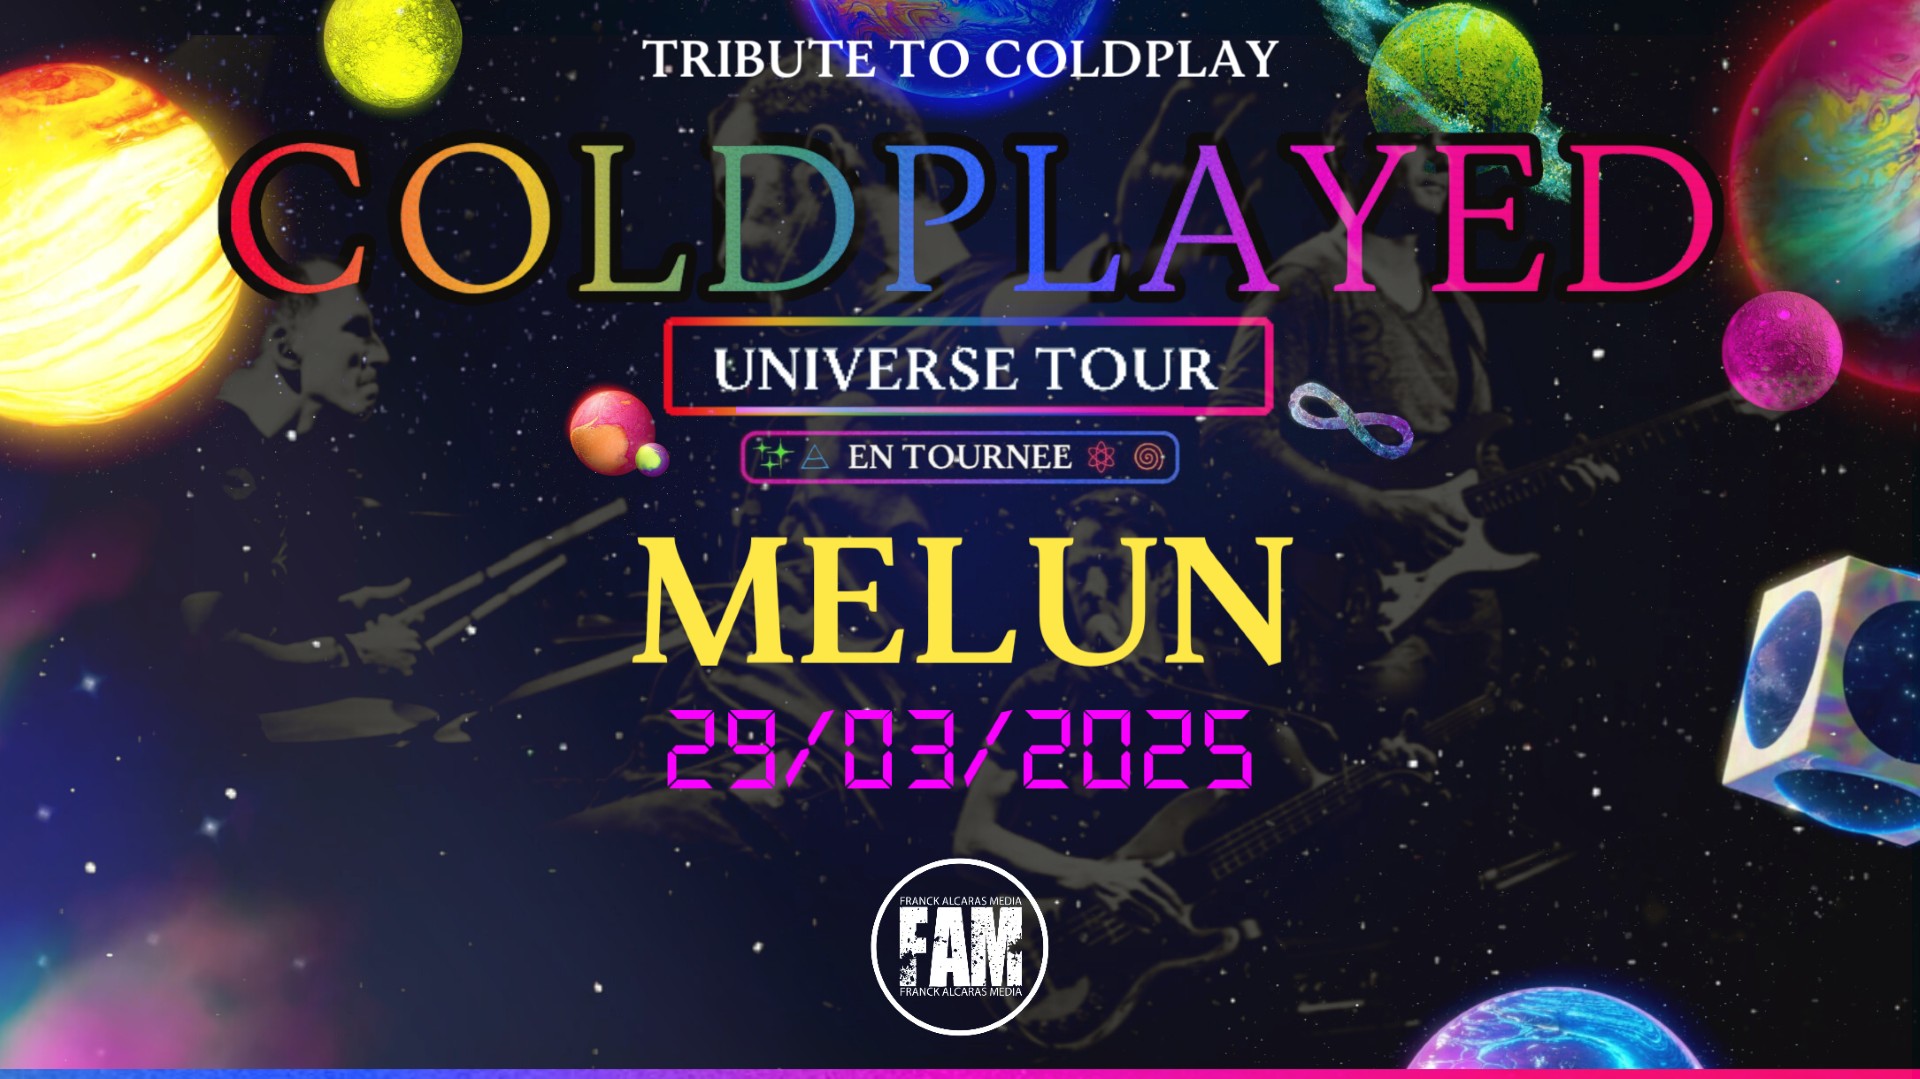 Coldplayed Live Melun